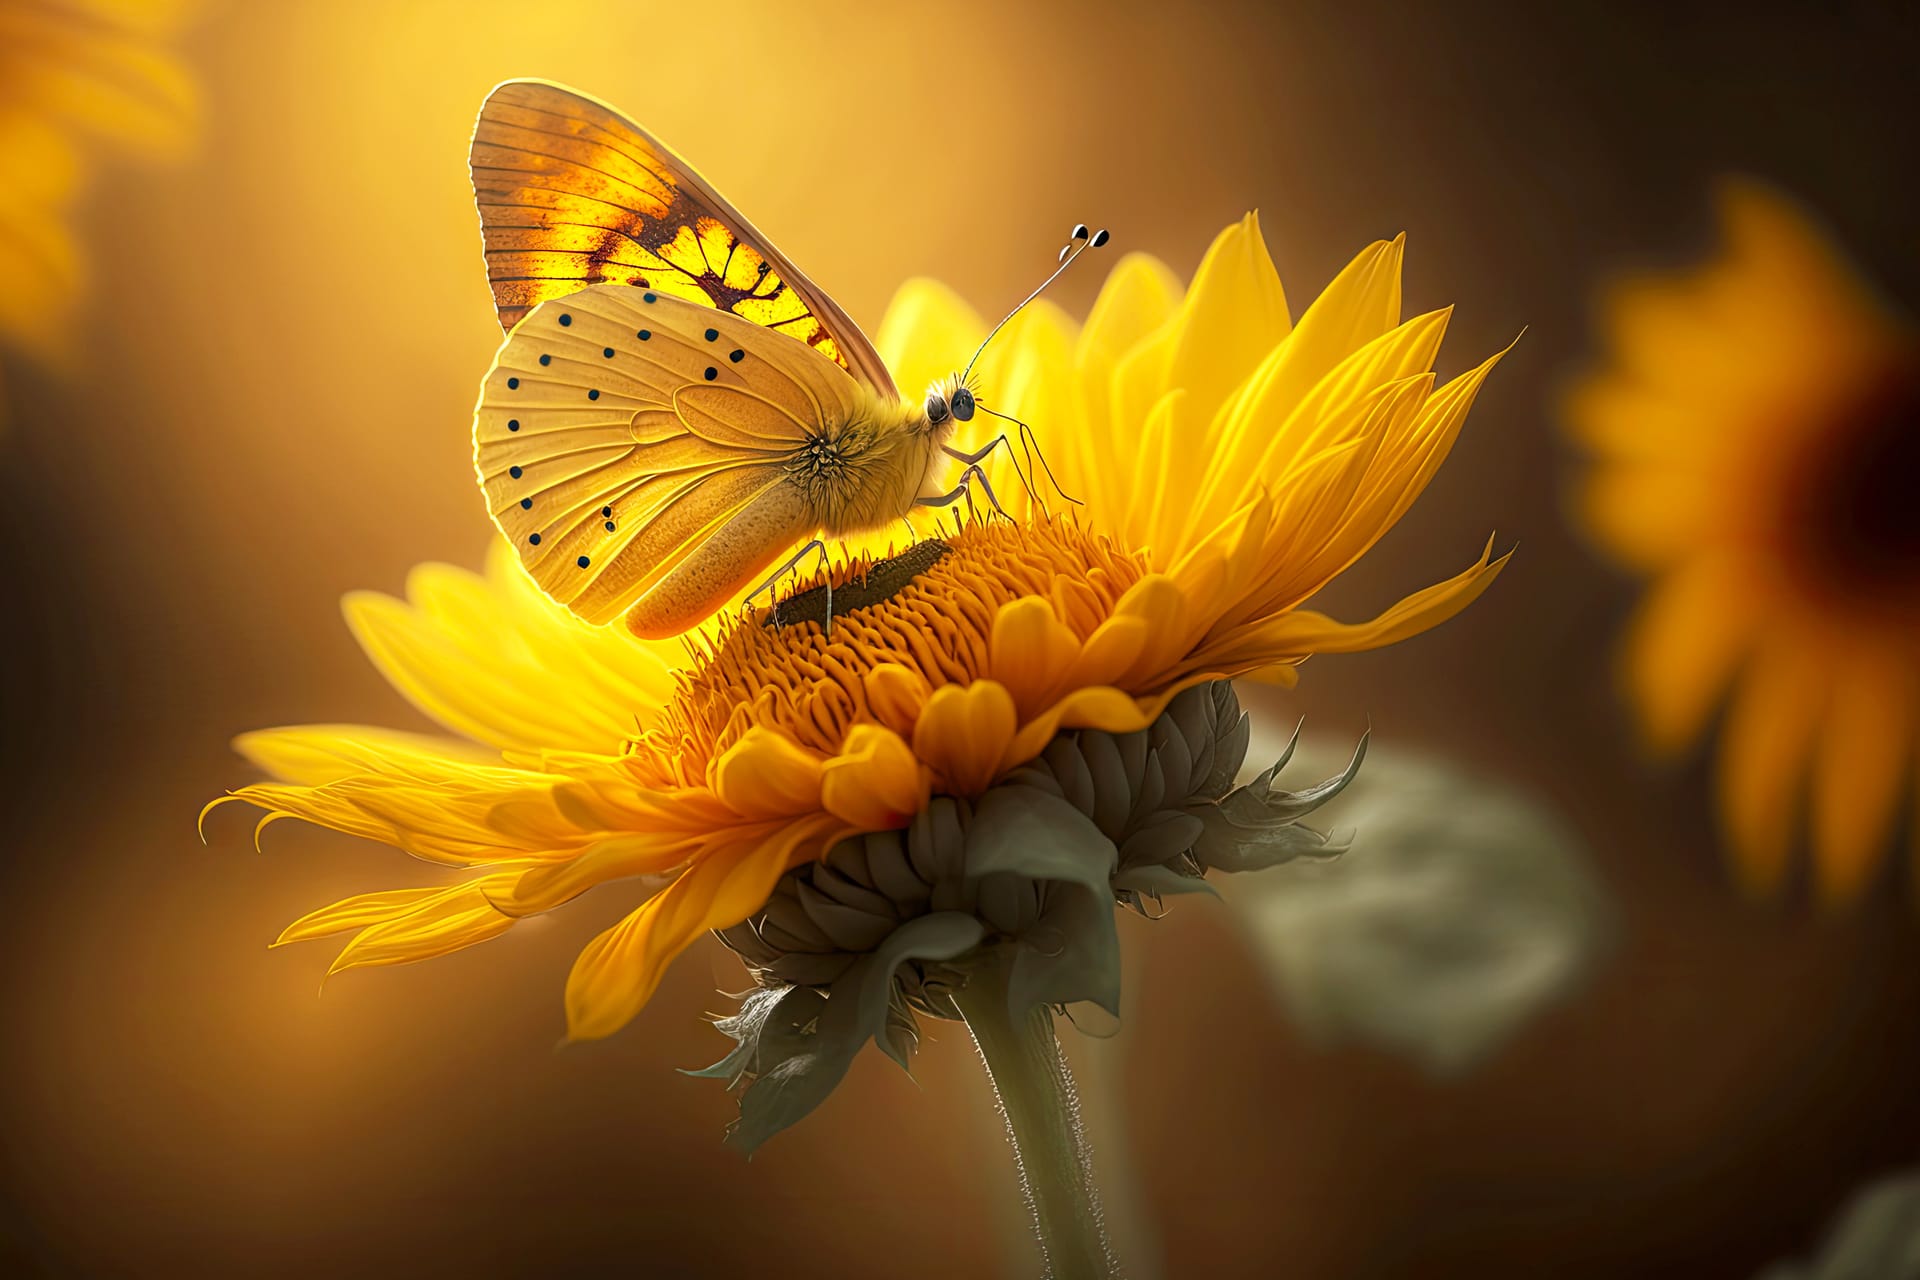 Sunlit yellow flower with beautiful butterfly blurred background image